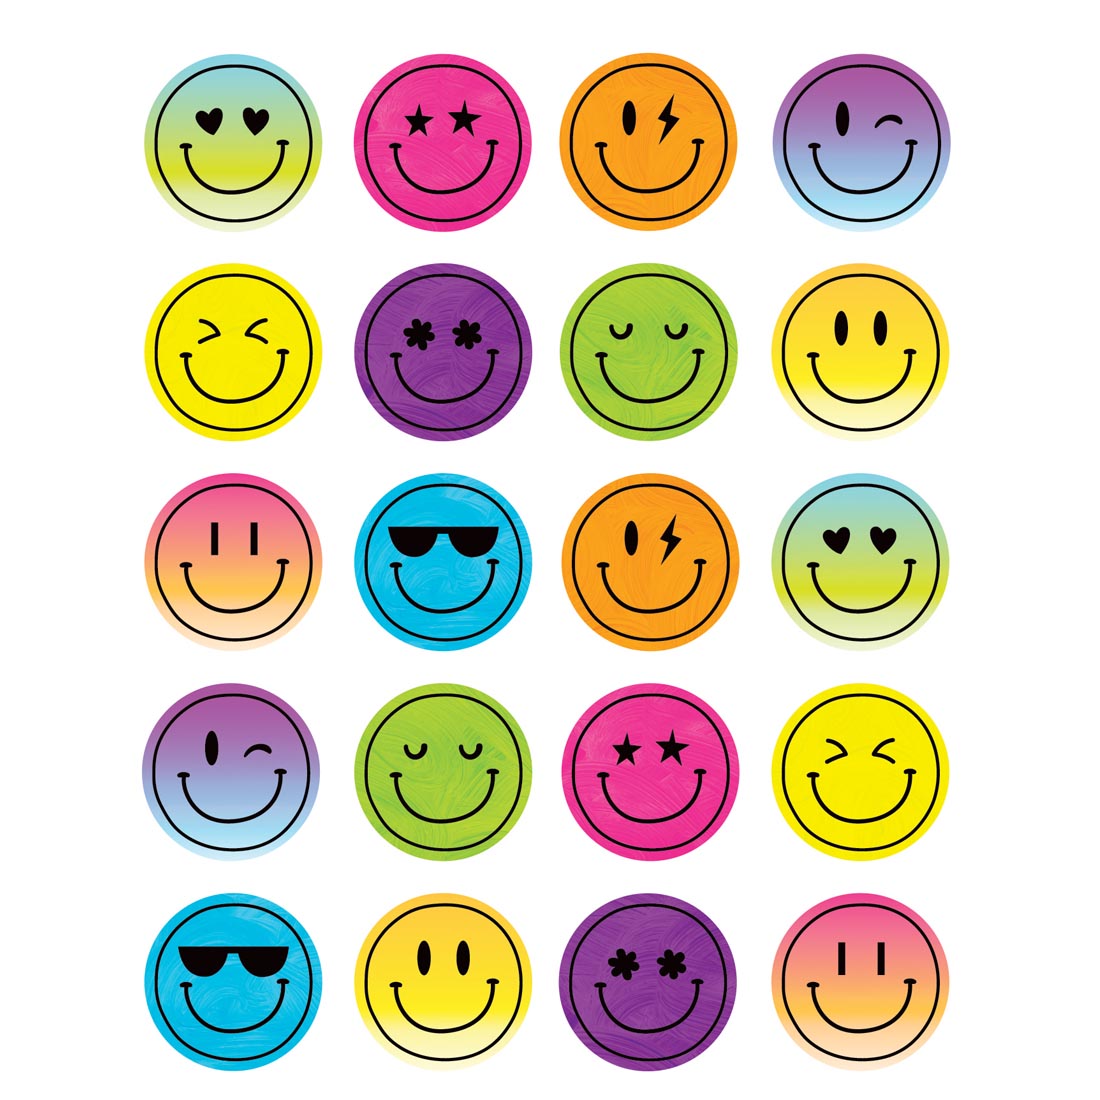 Smiley Faces Stickers from the Brights 4Ever collection by Teacher Created Resources